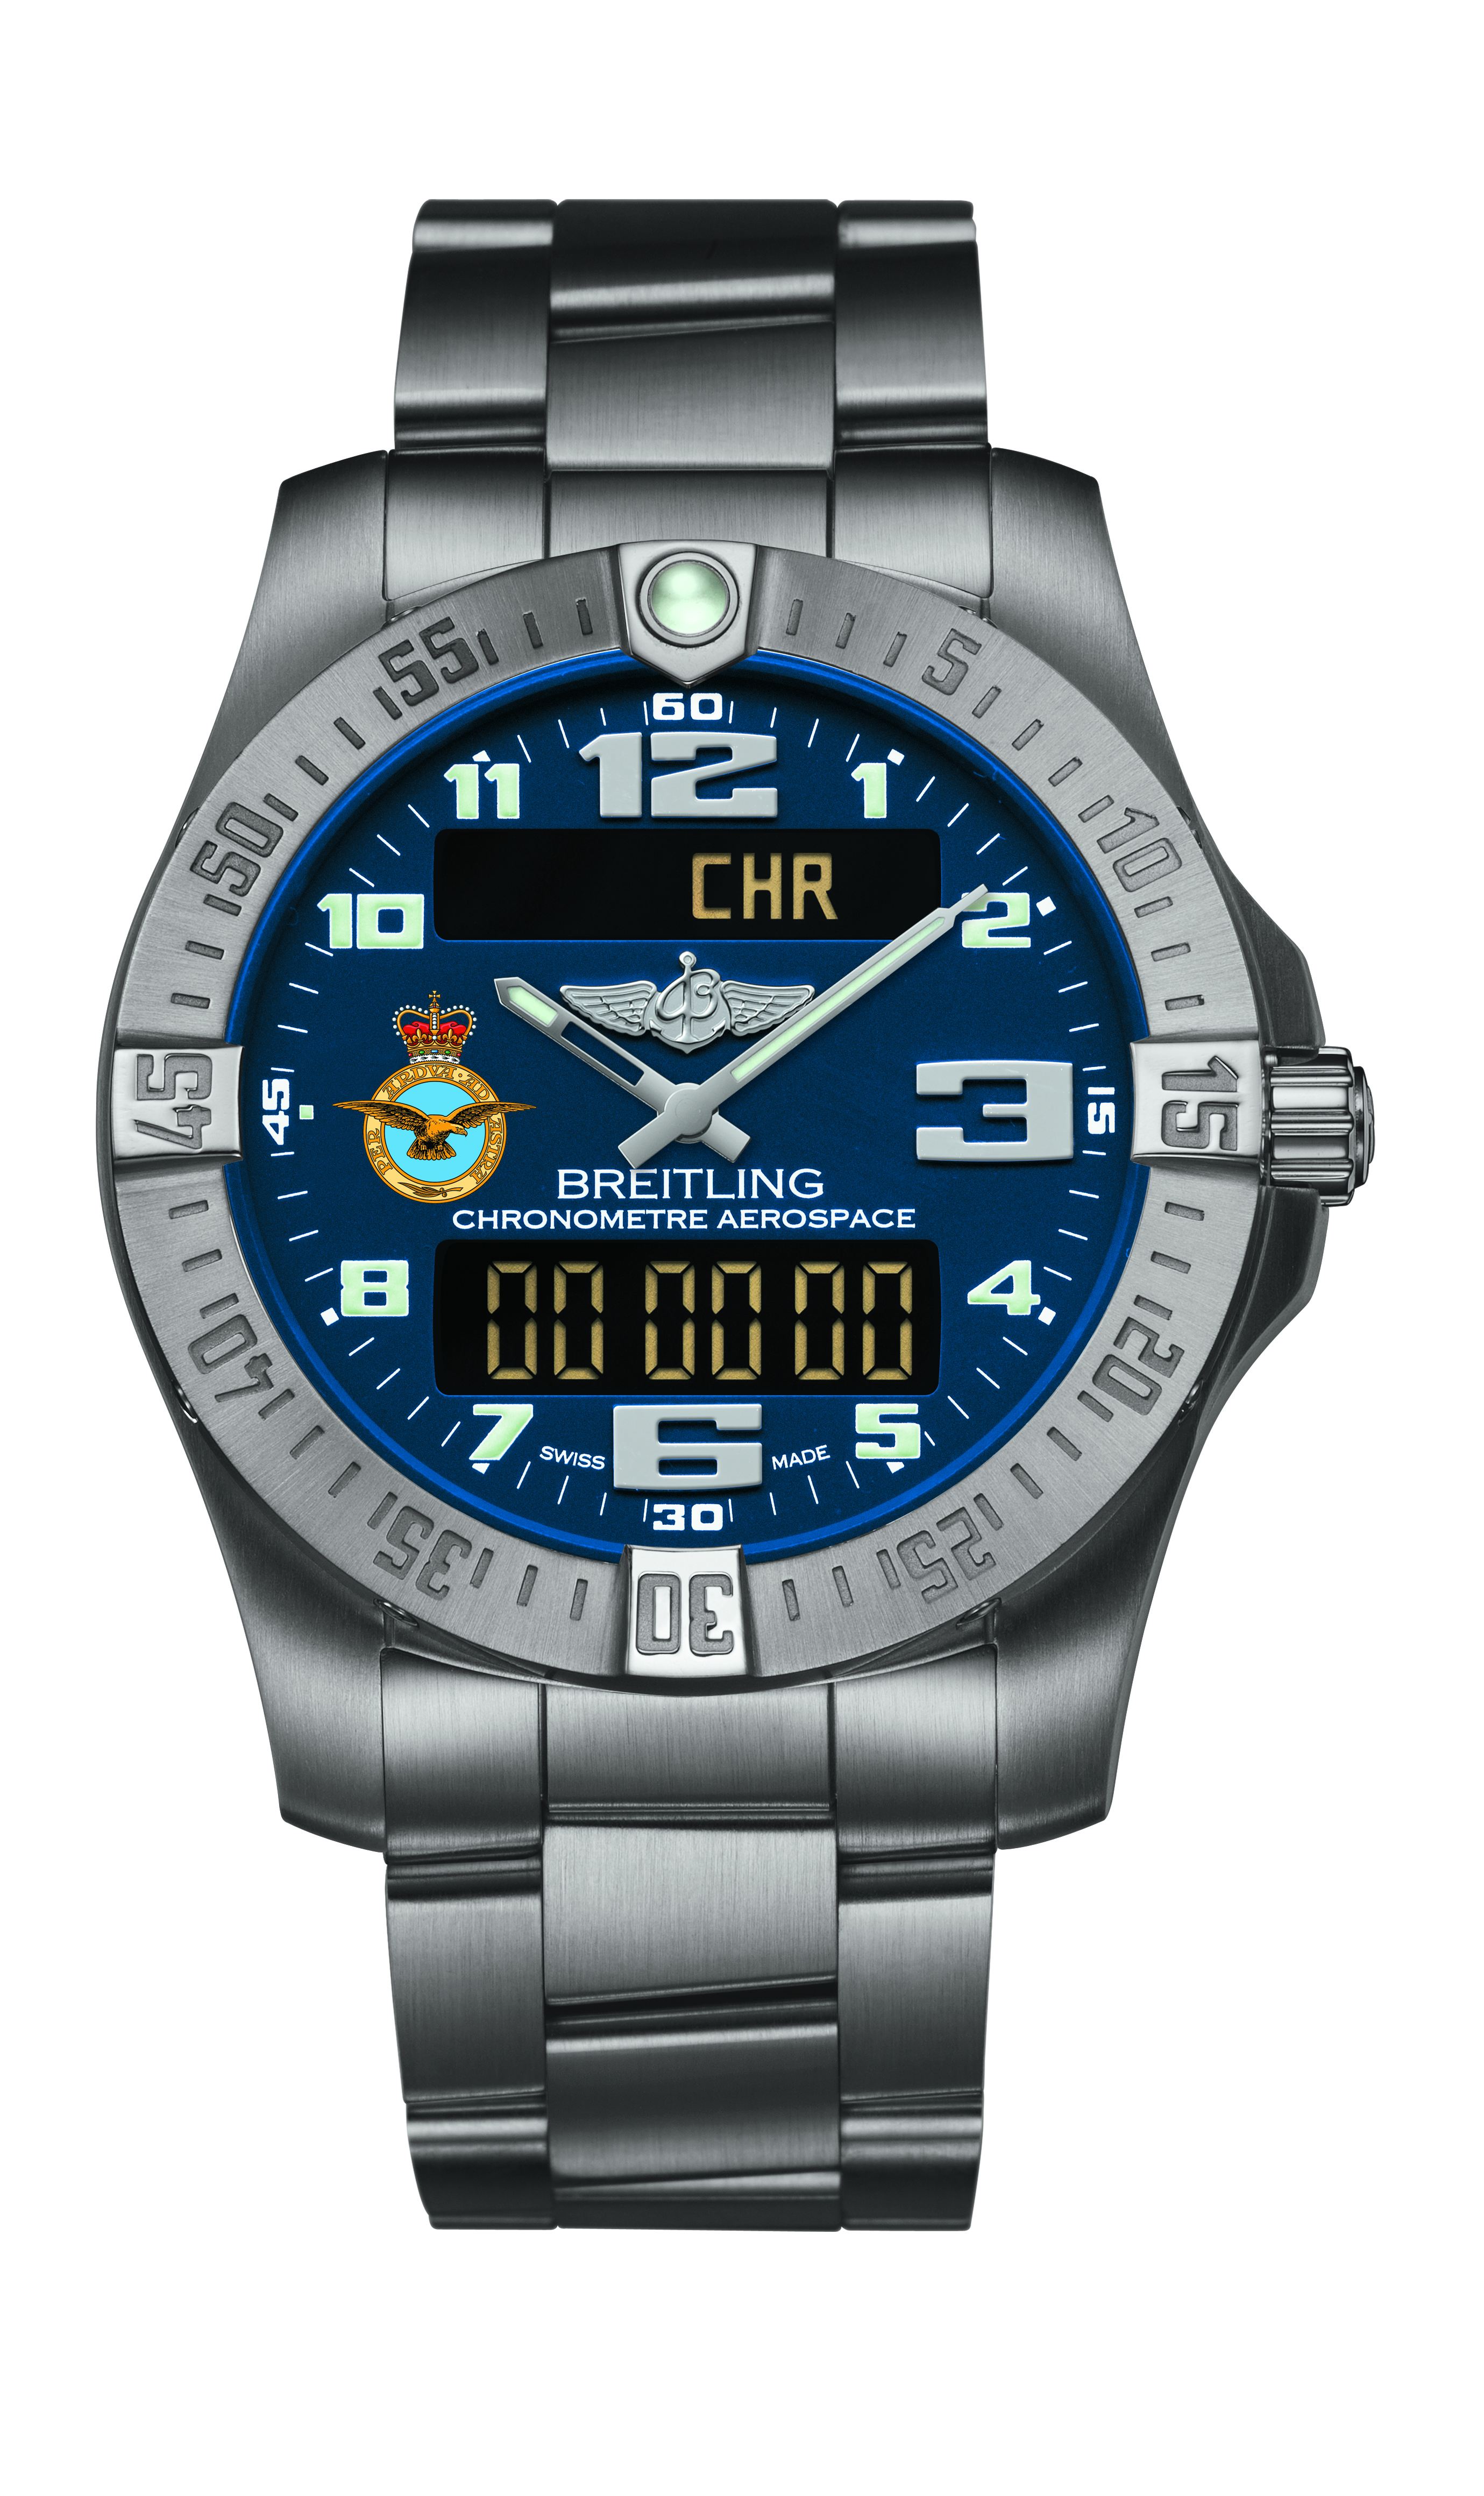 Breitling limited-edition watch